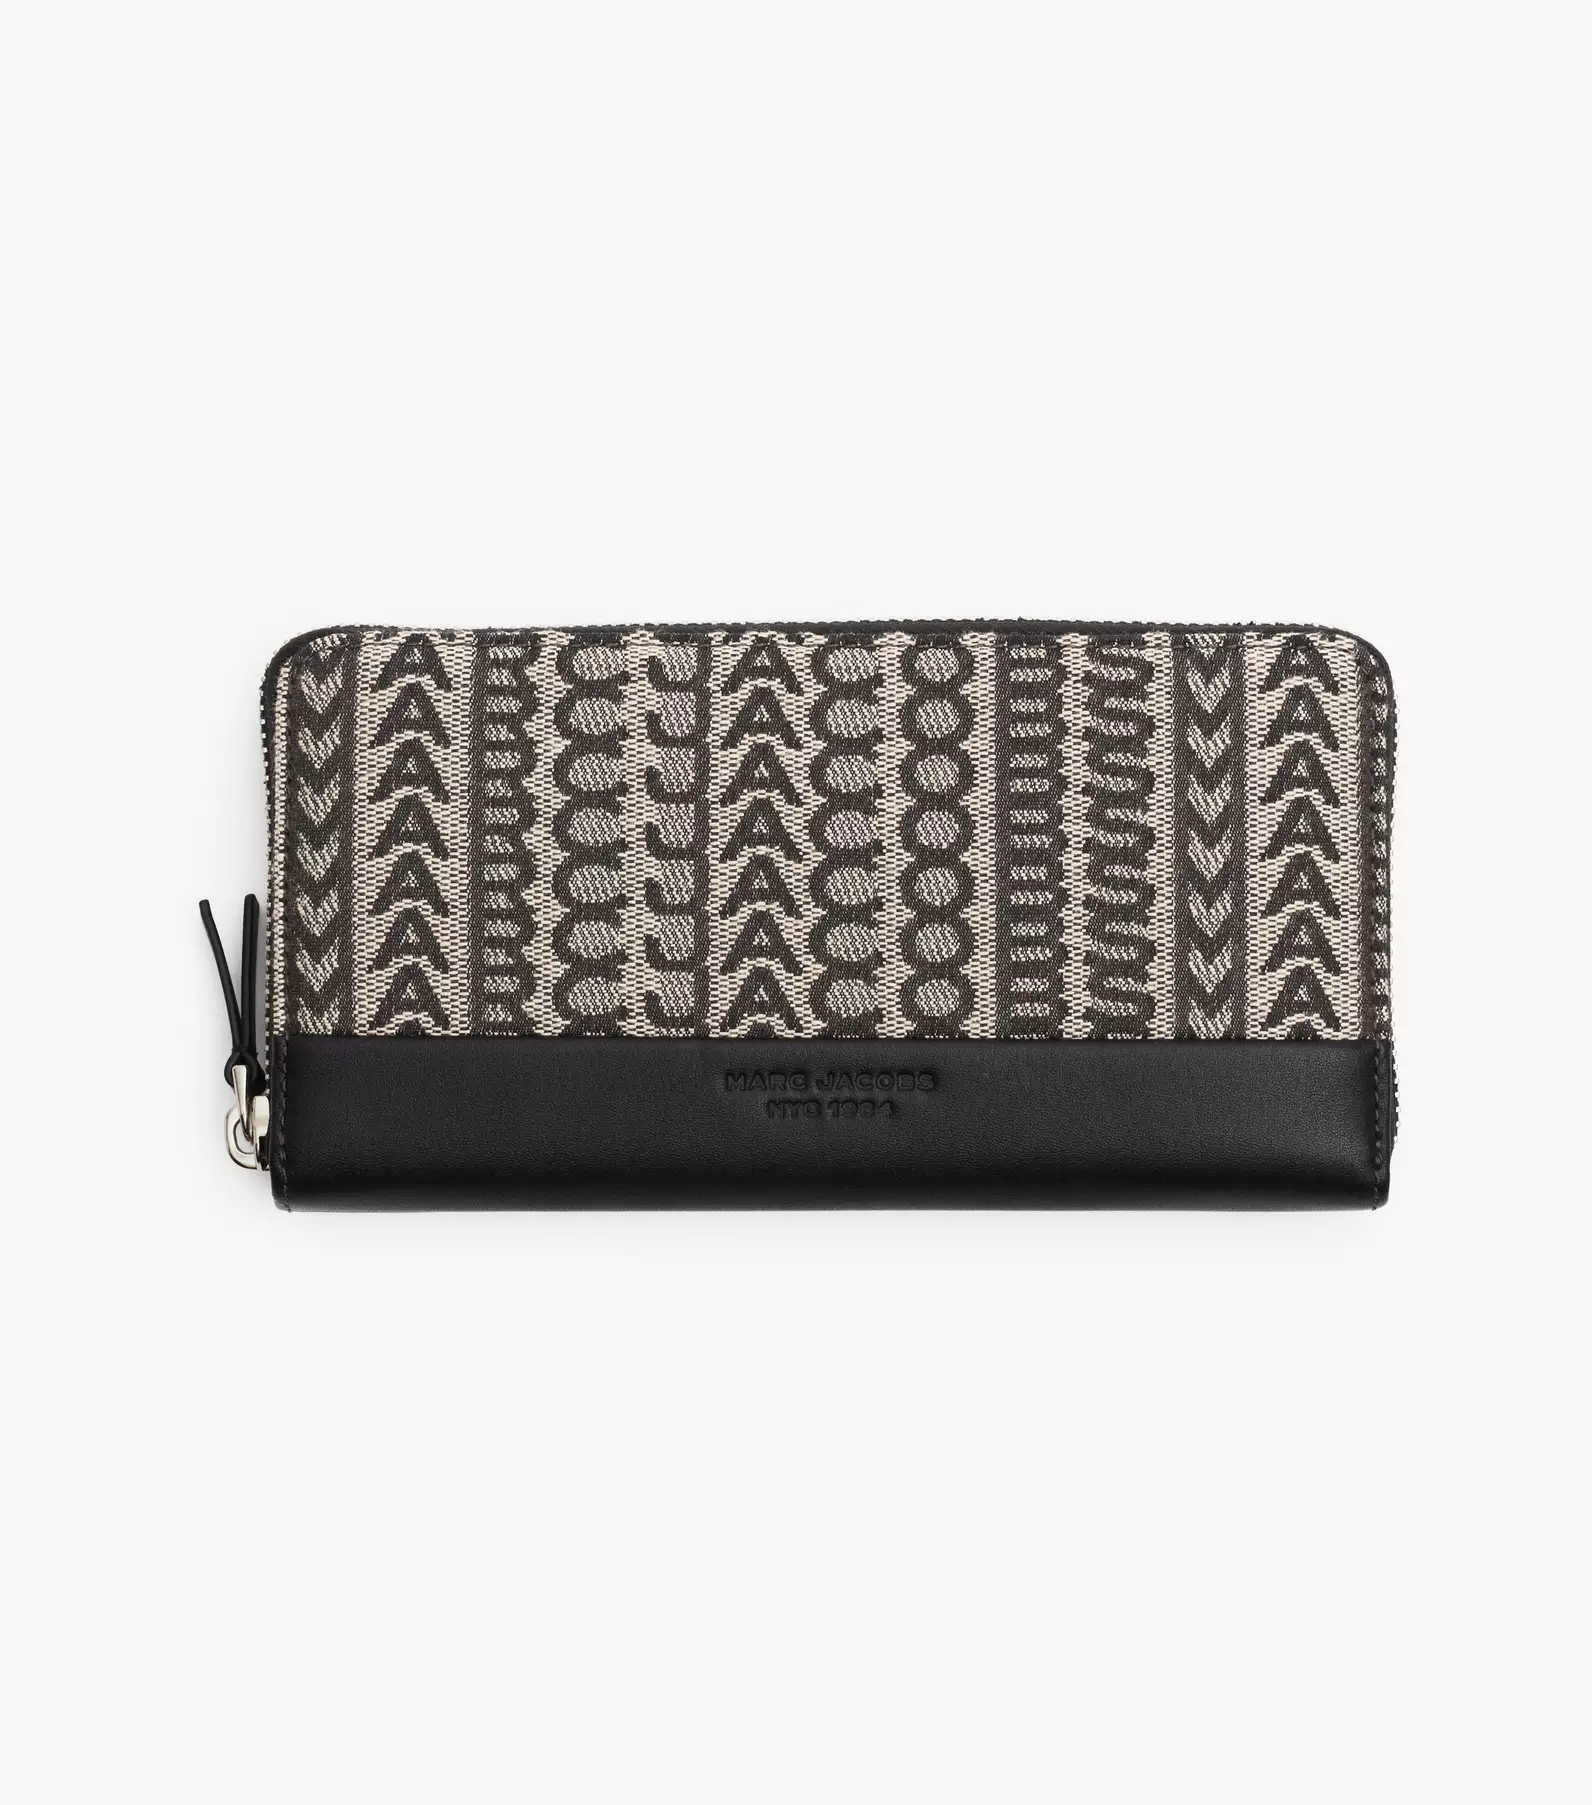 Embossed Leather TB Continental Wallet in Black - Women